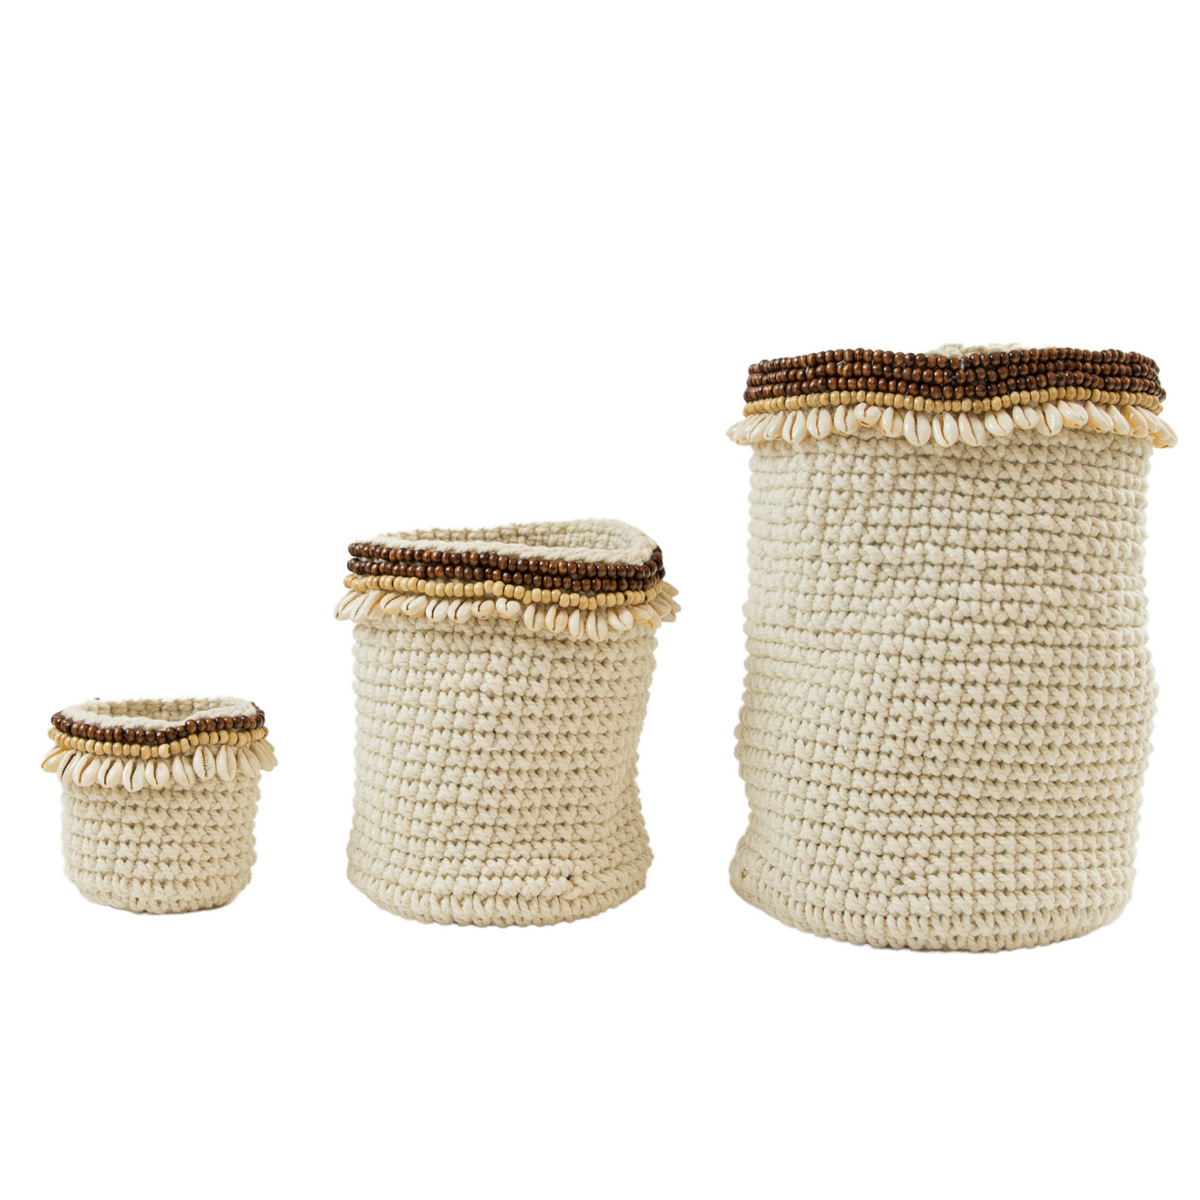 Crochet 3 piece basket with wooden beads & shell (BSHSET1079)